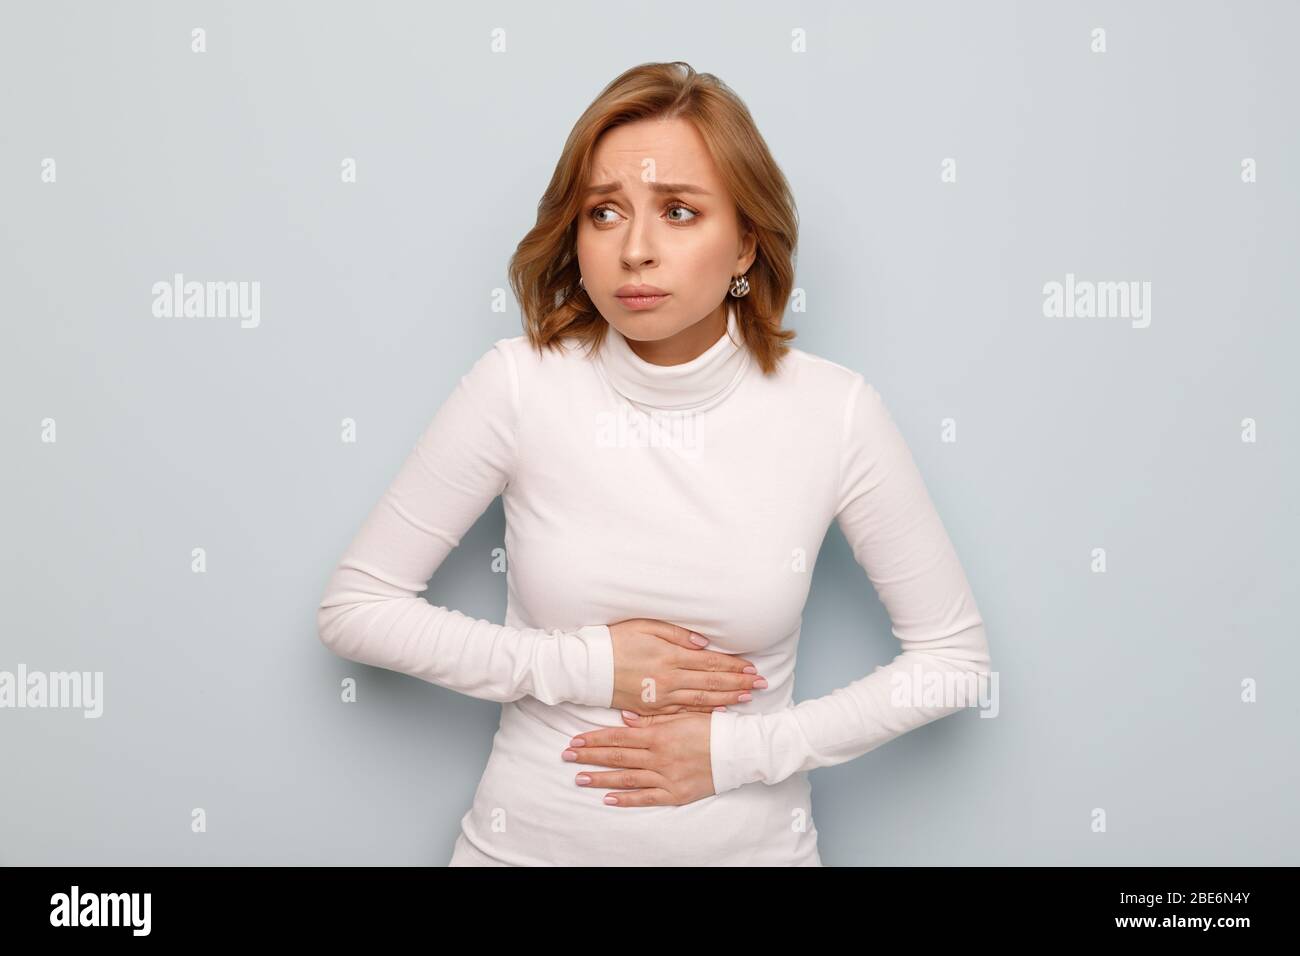 Health issues problems concept. Woman suffering from stomach pain, feeling abdominal pain or cramps, isolated on blue background.Period menstruation, Stock Photo